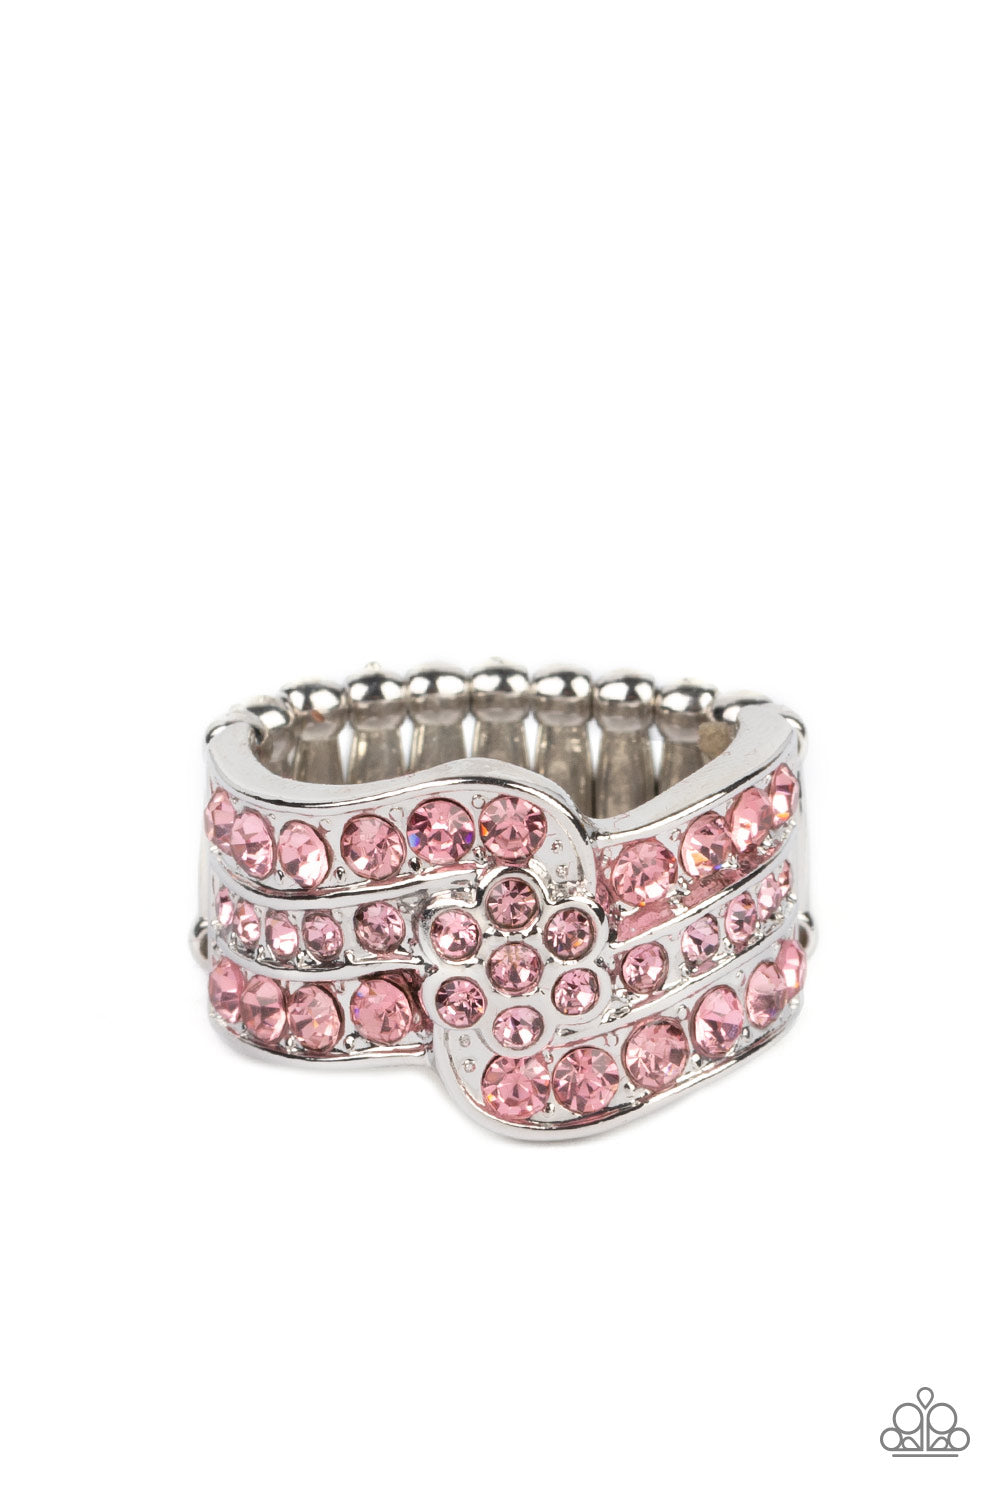 Paparazzi Rings - No Flowers Barred - Pink